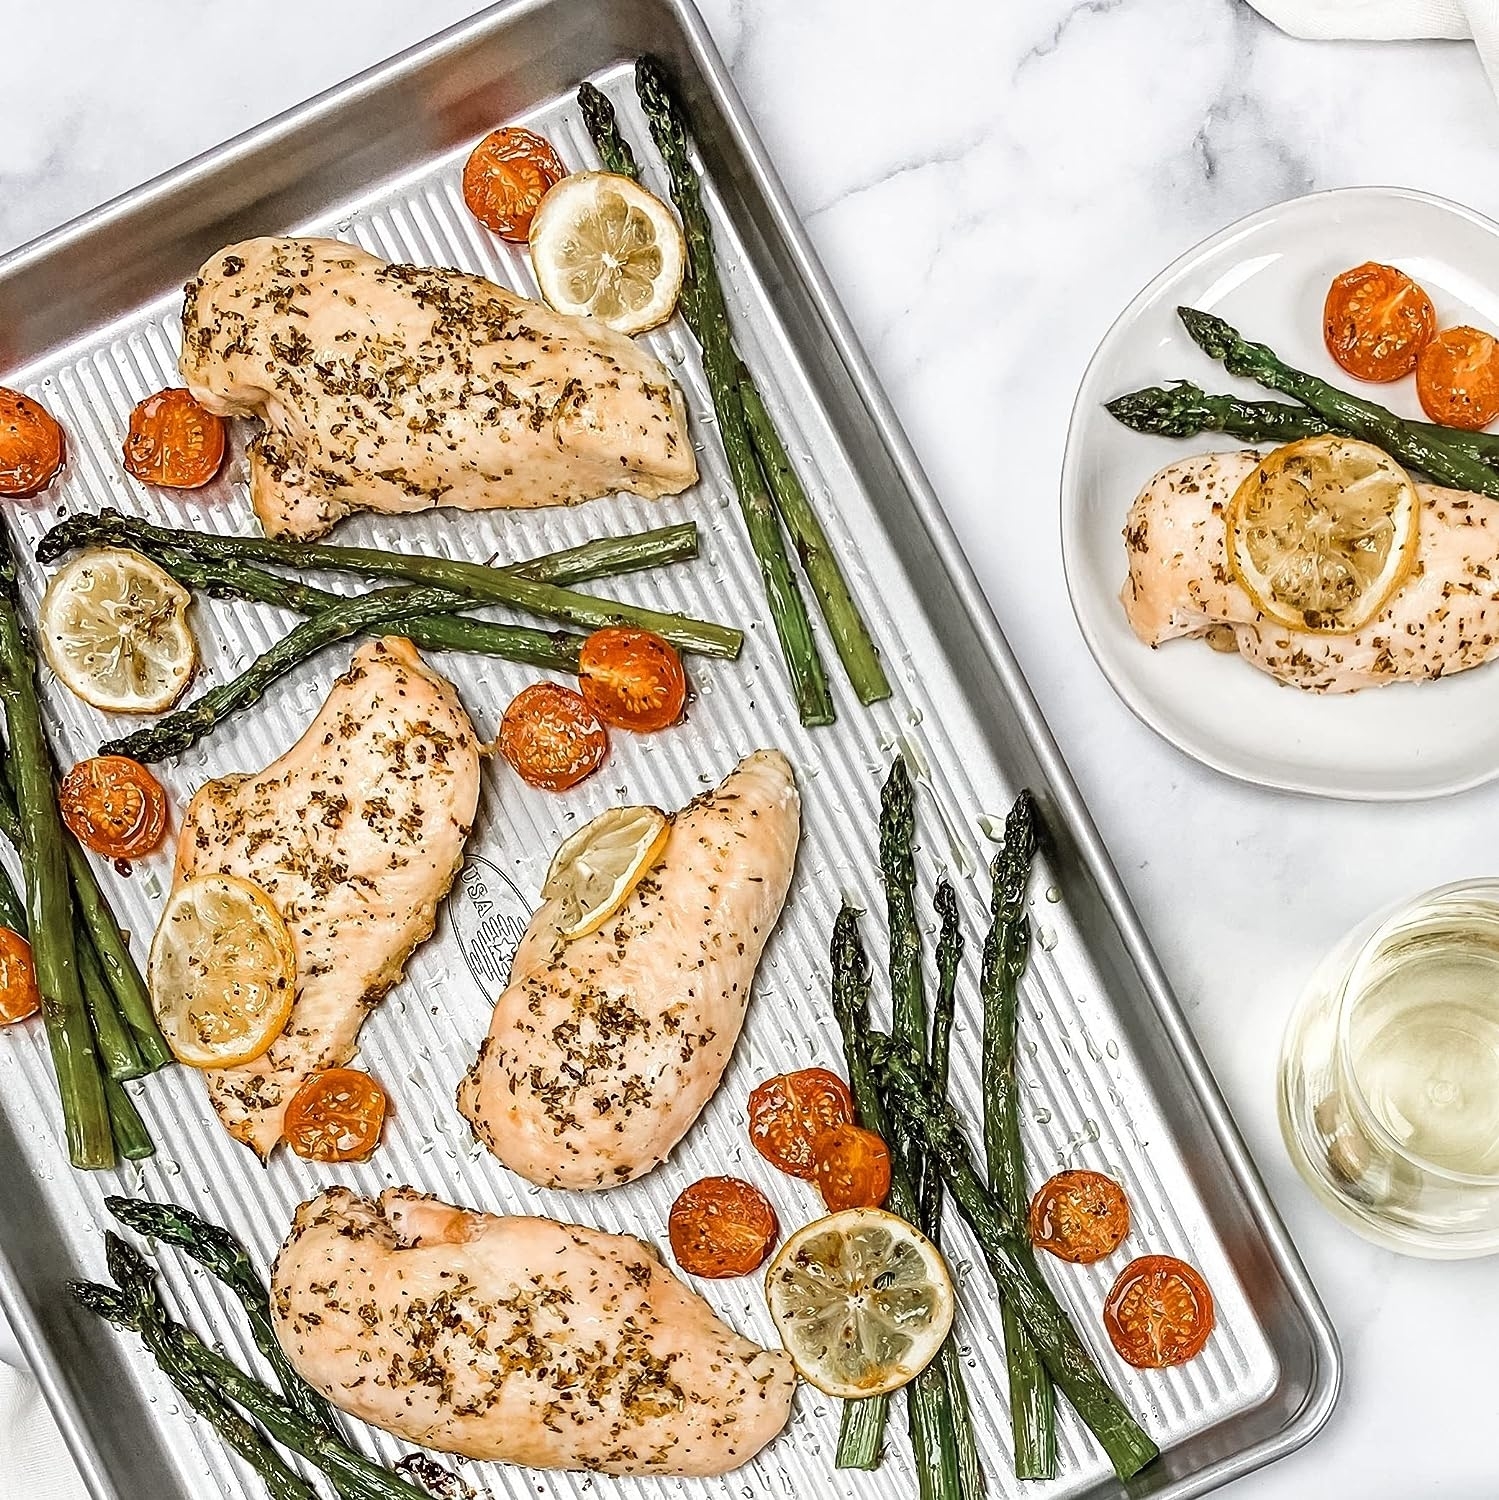 the sheet pan with chicken and vegetables on it